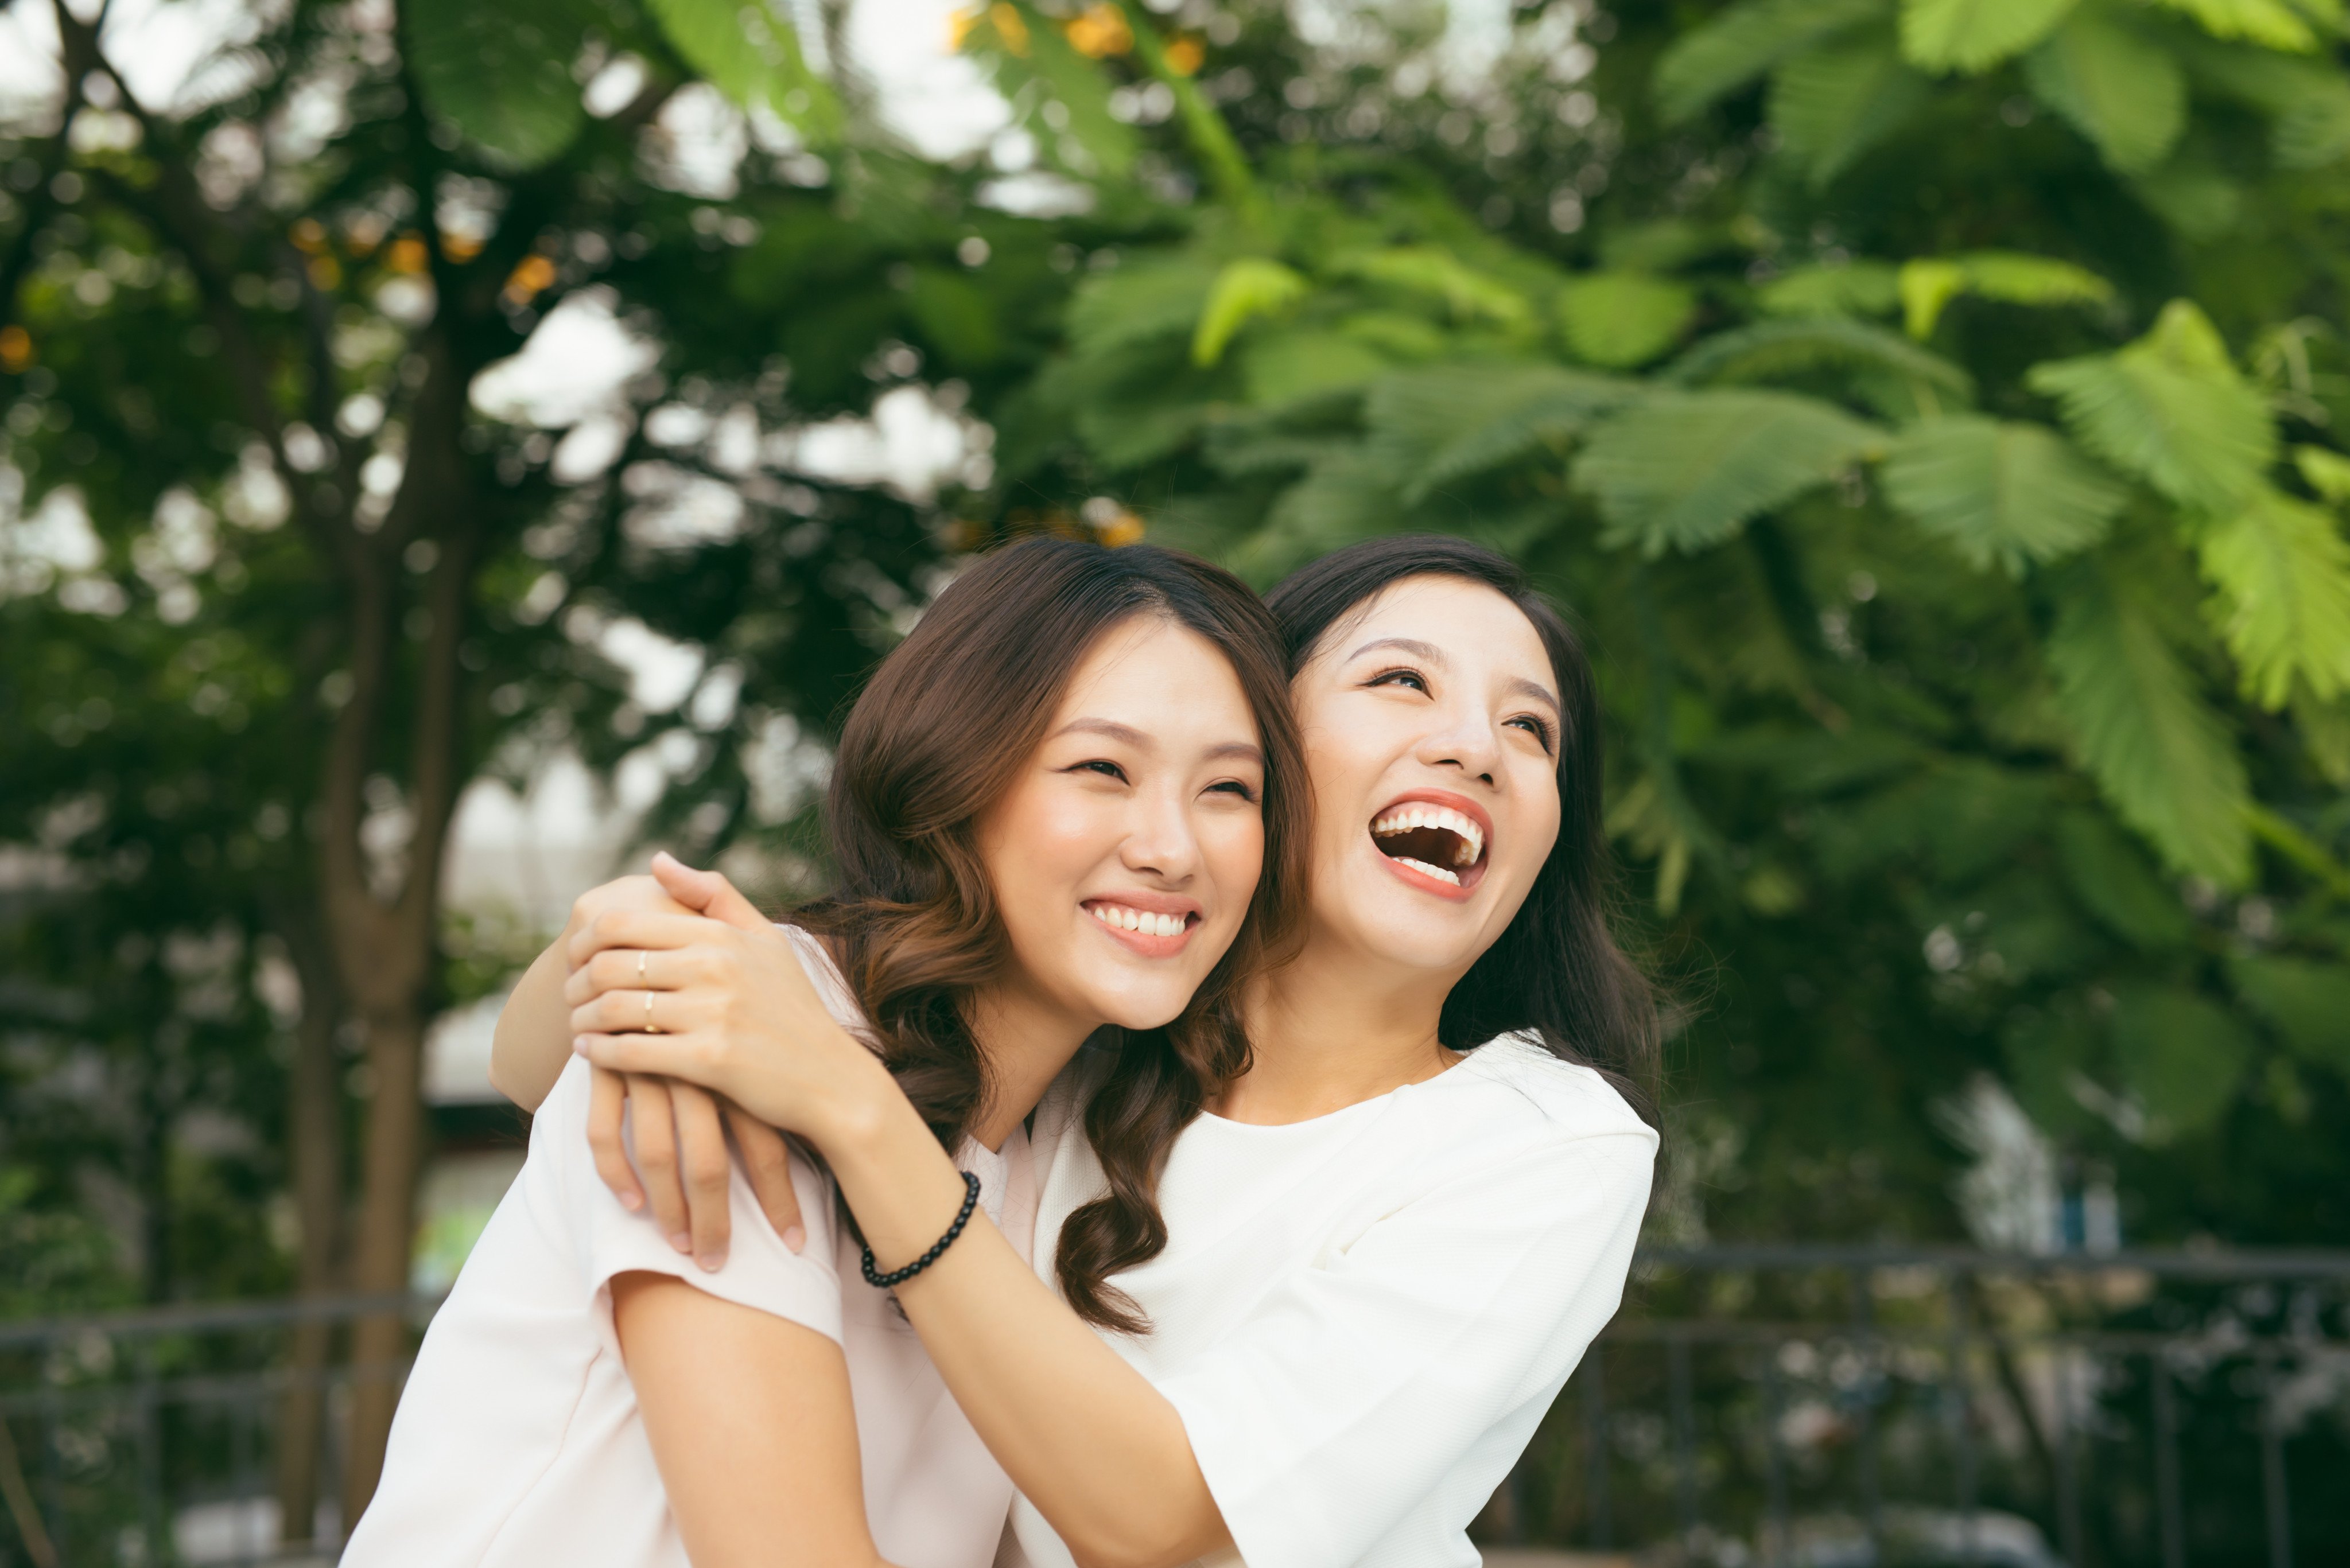 How to be happy? Have good friends, live a purposeful life, set yourself goals, do something for others, and reflect on each day – what made you feel loved, what stimulated you – a life coach says. Photo: Shutterstock